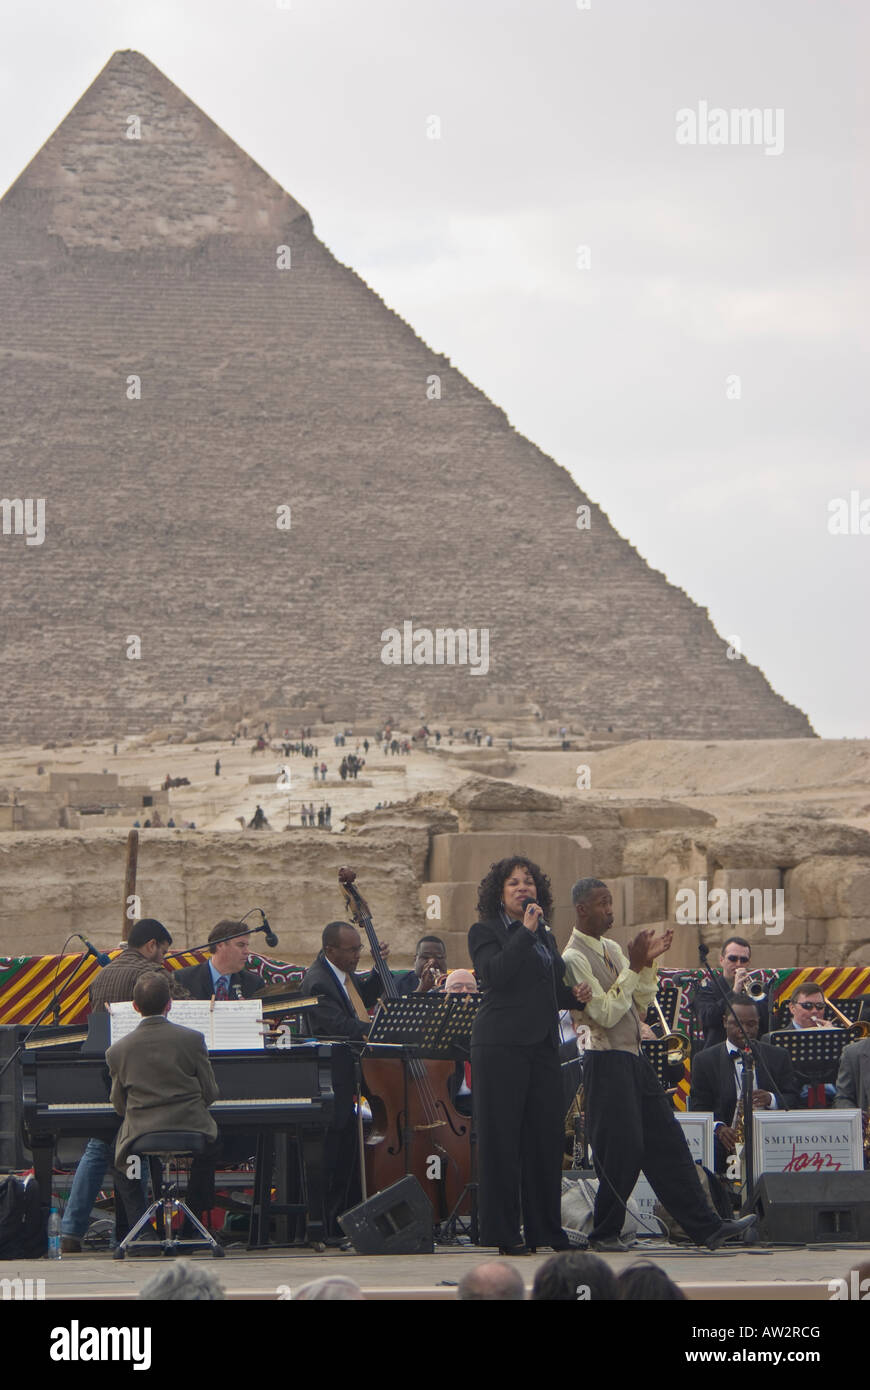 Smithsonian Jazz Masterworks Orchestra with Delores-King Williams, singer, and Chester Whitmore, at the Pyramids, Cairo, Egypt Stock Photo